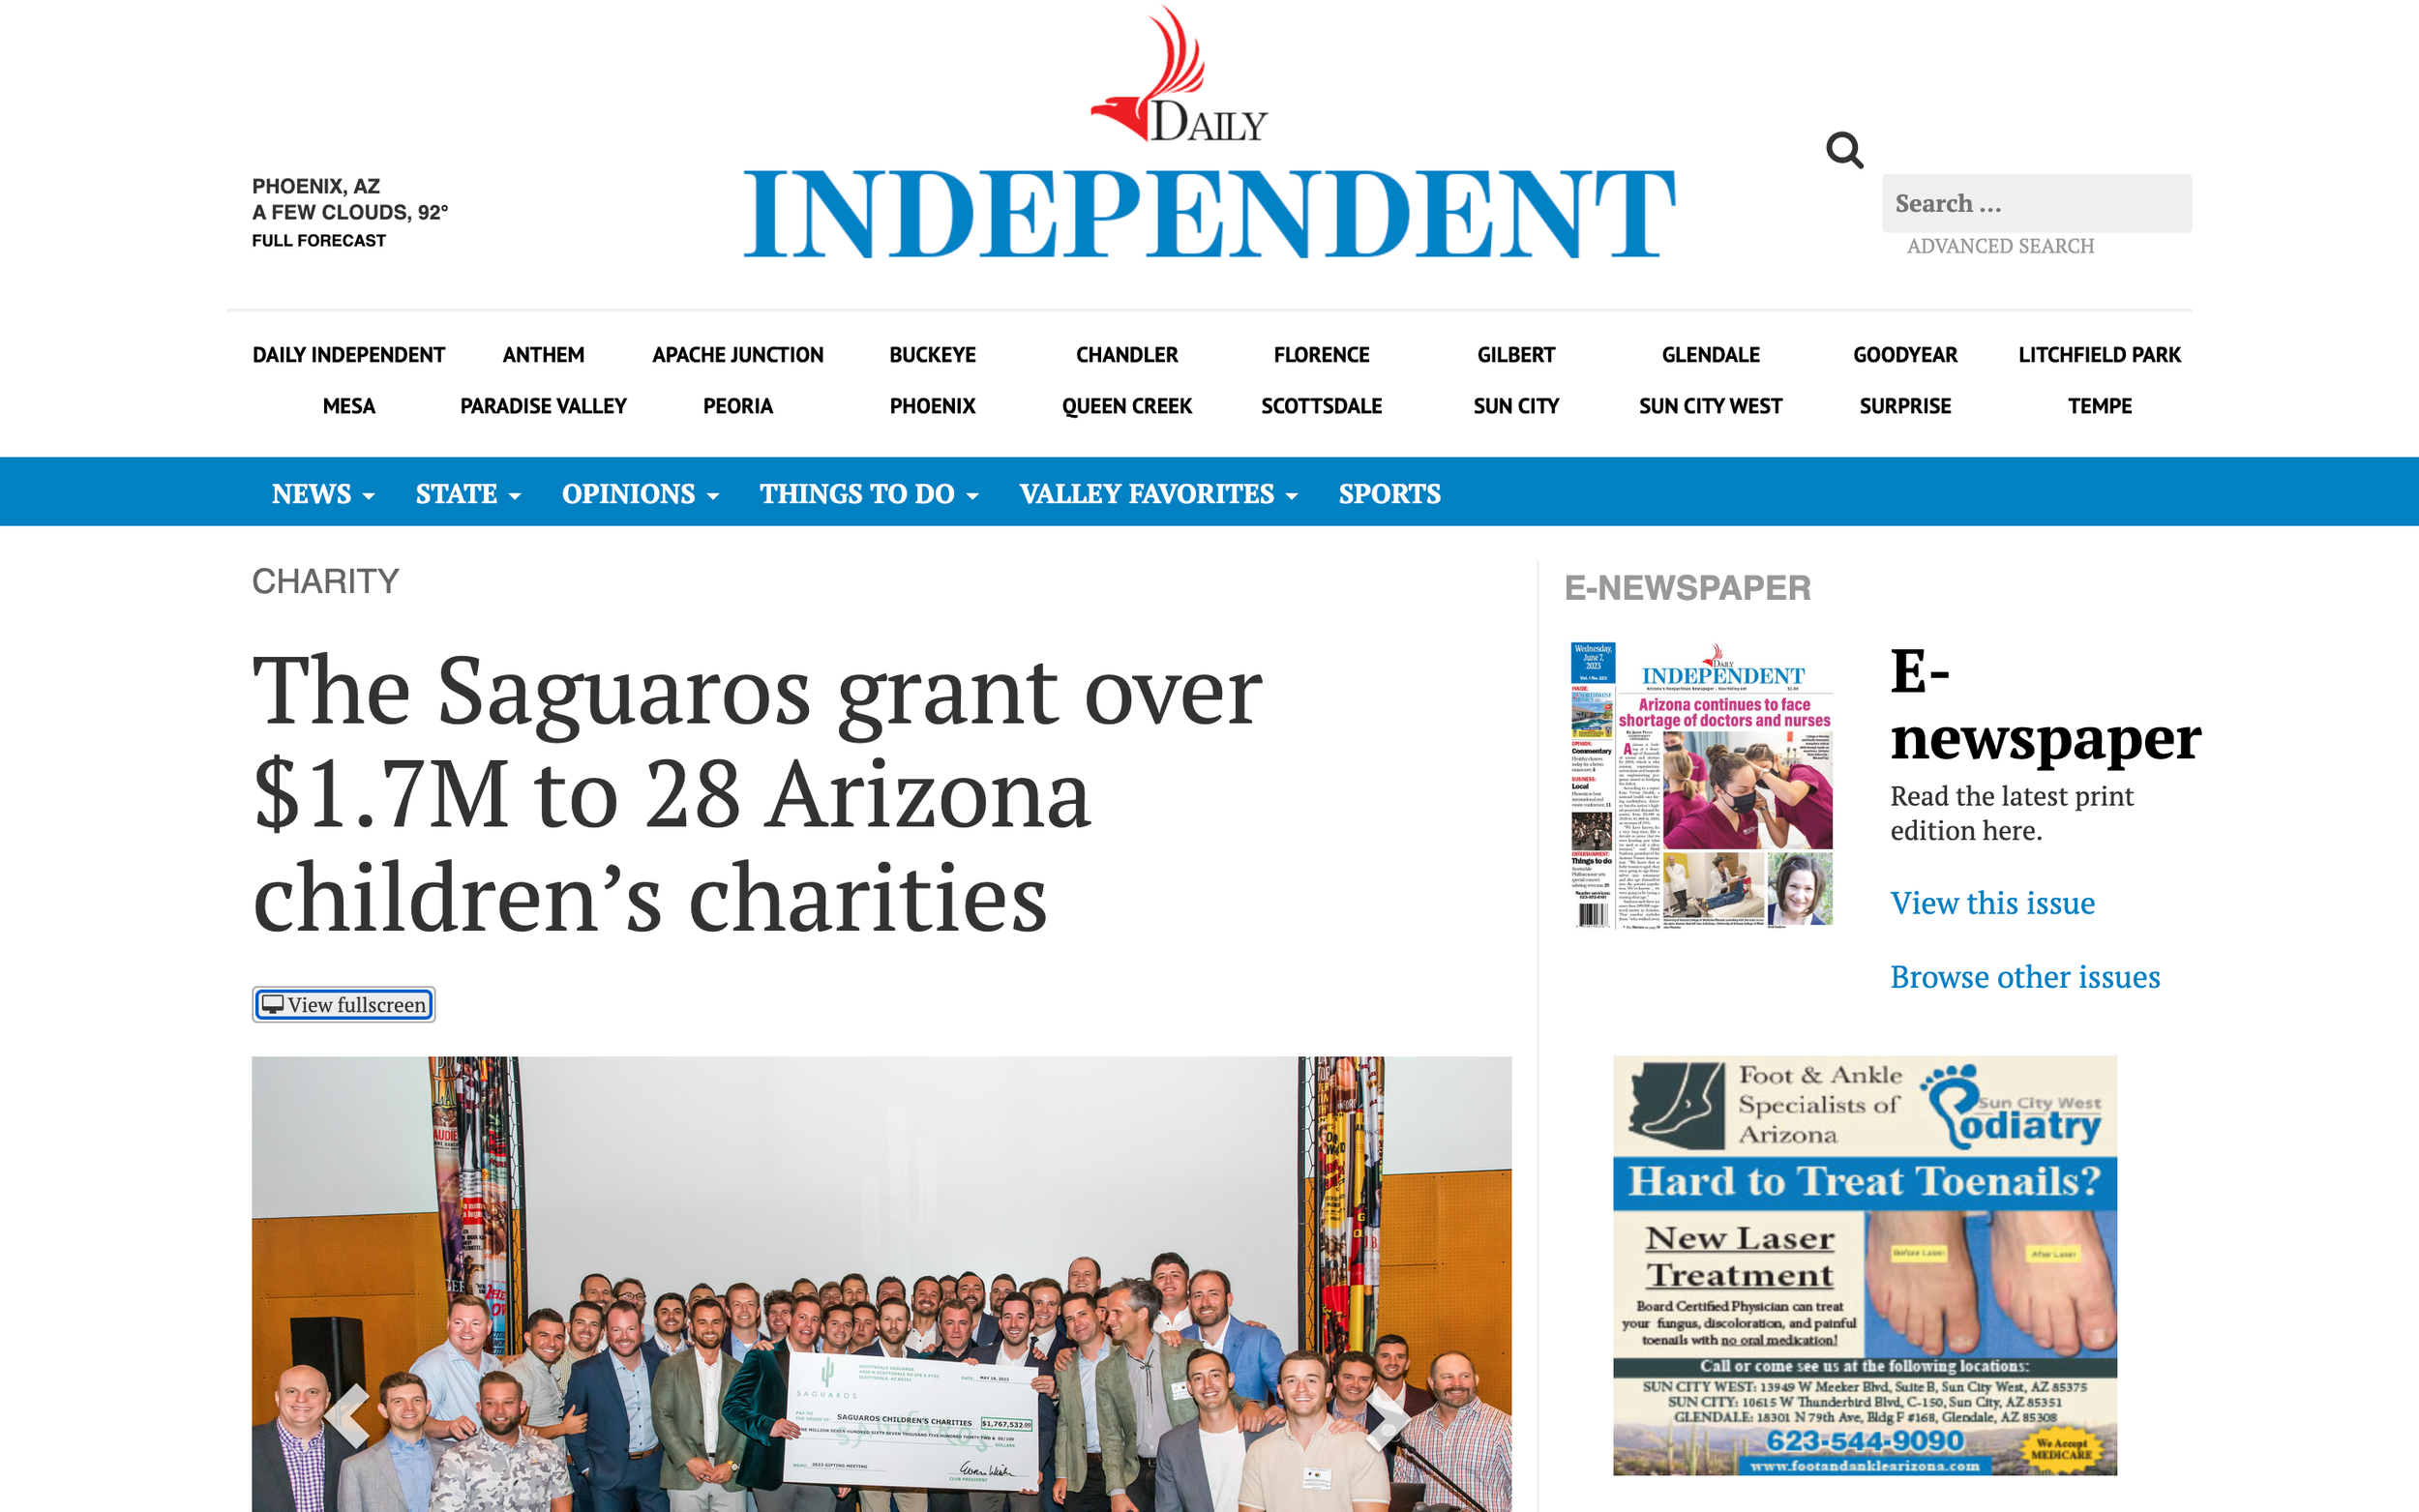 Daily Independent: The Saguaros grant over $1.7M to 28 Arizona children’s charities